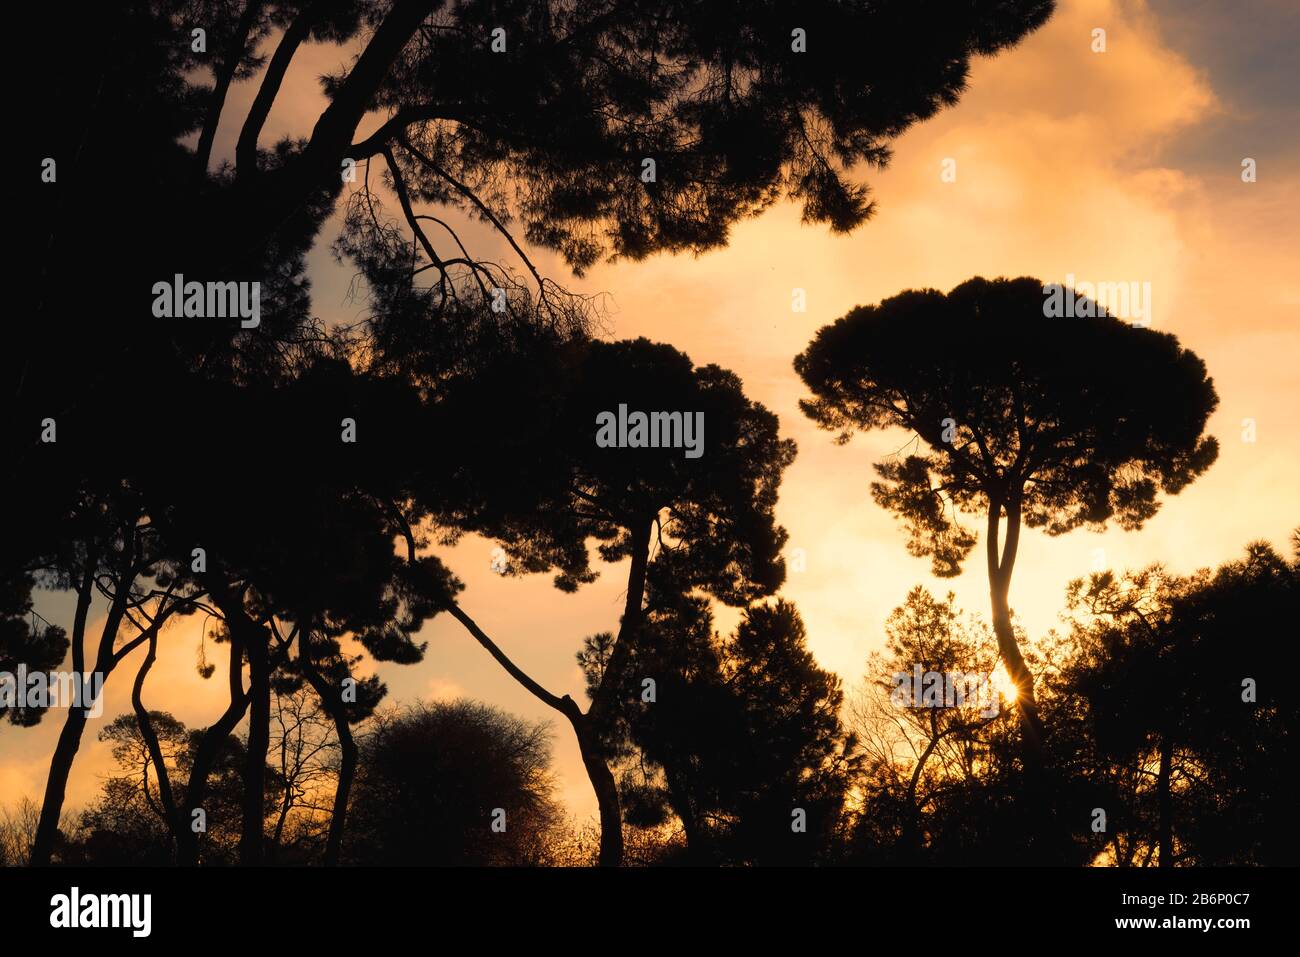 The silhouette of Mediterranean pine trees at sunrise. Stock Photo